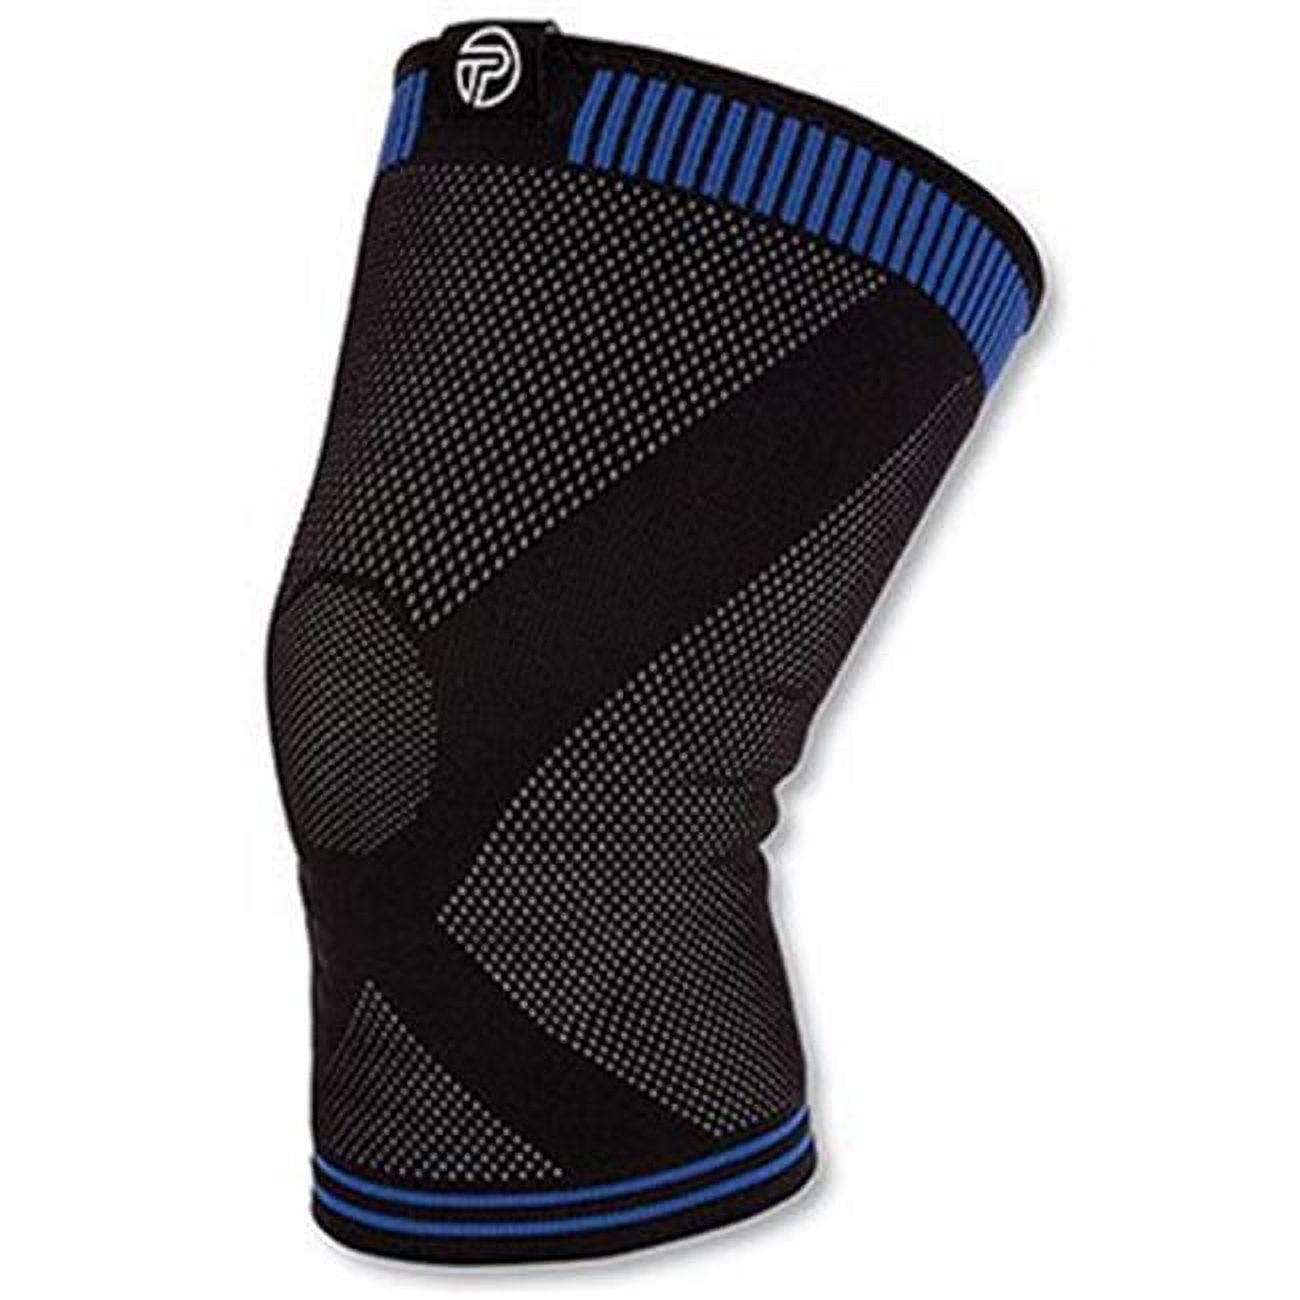 Actimove Kids Knee Support Open Patella, Navy, Youth